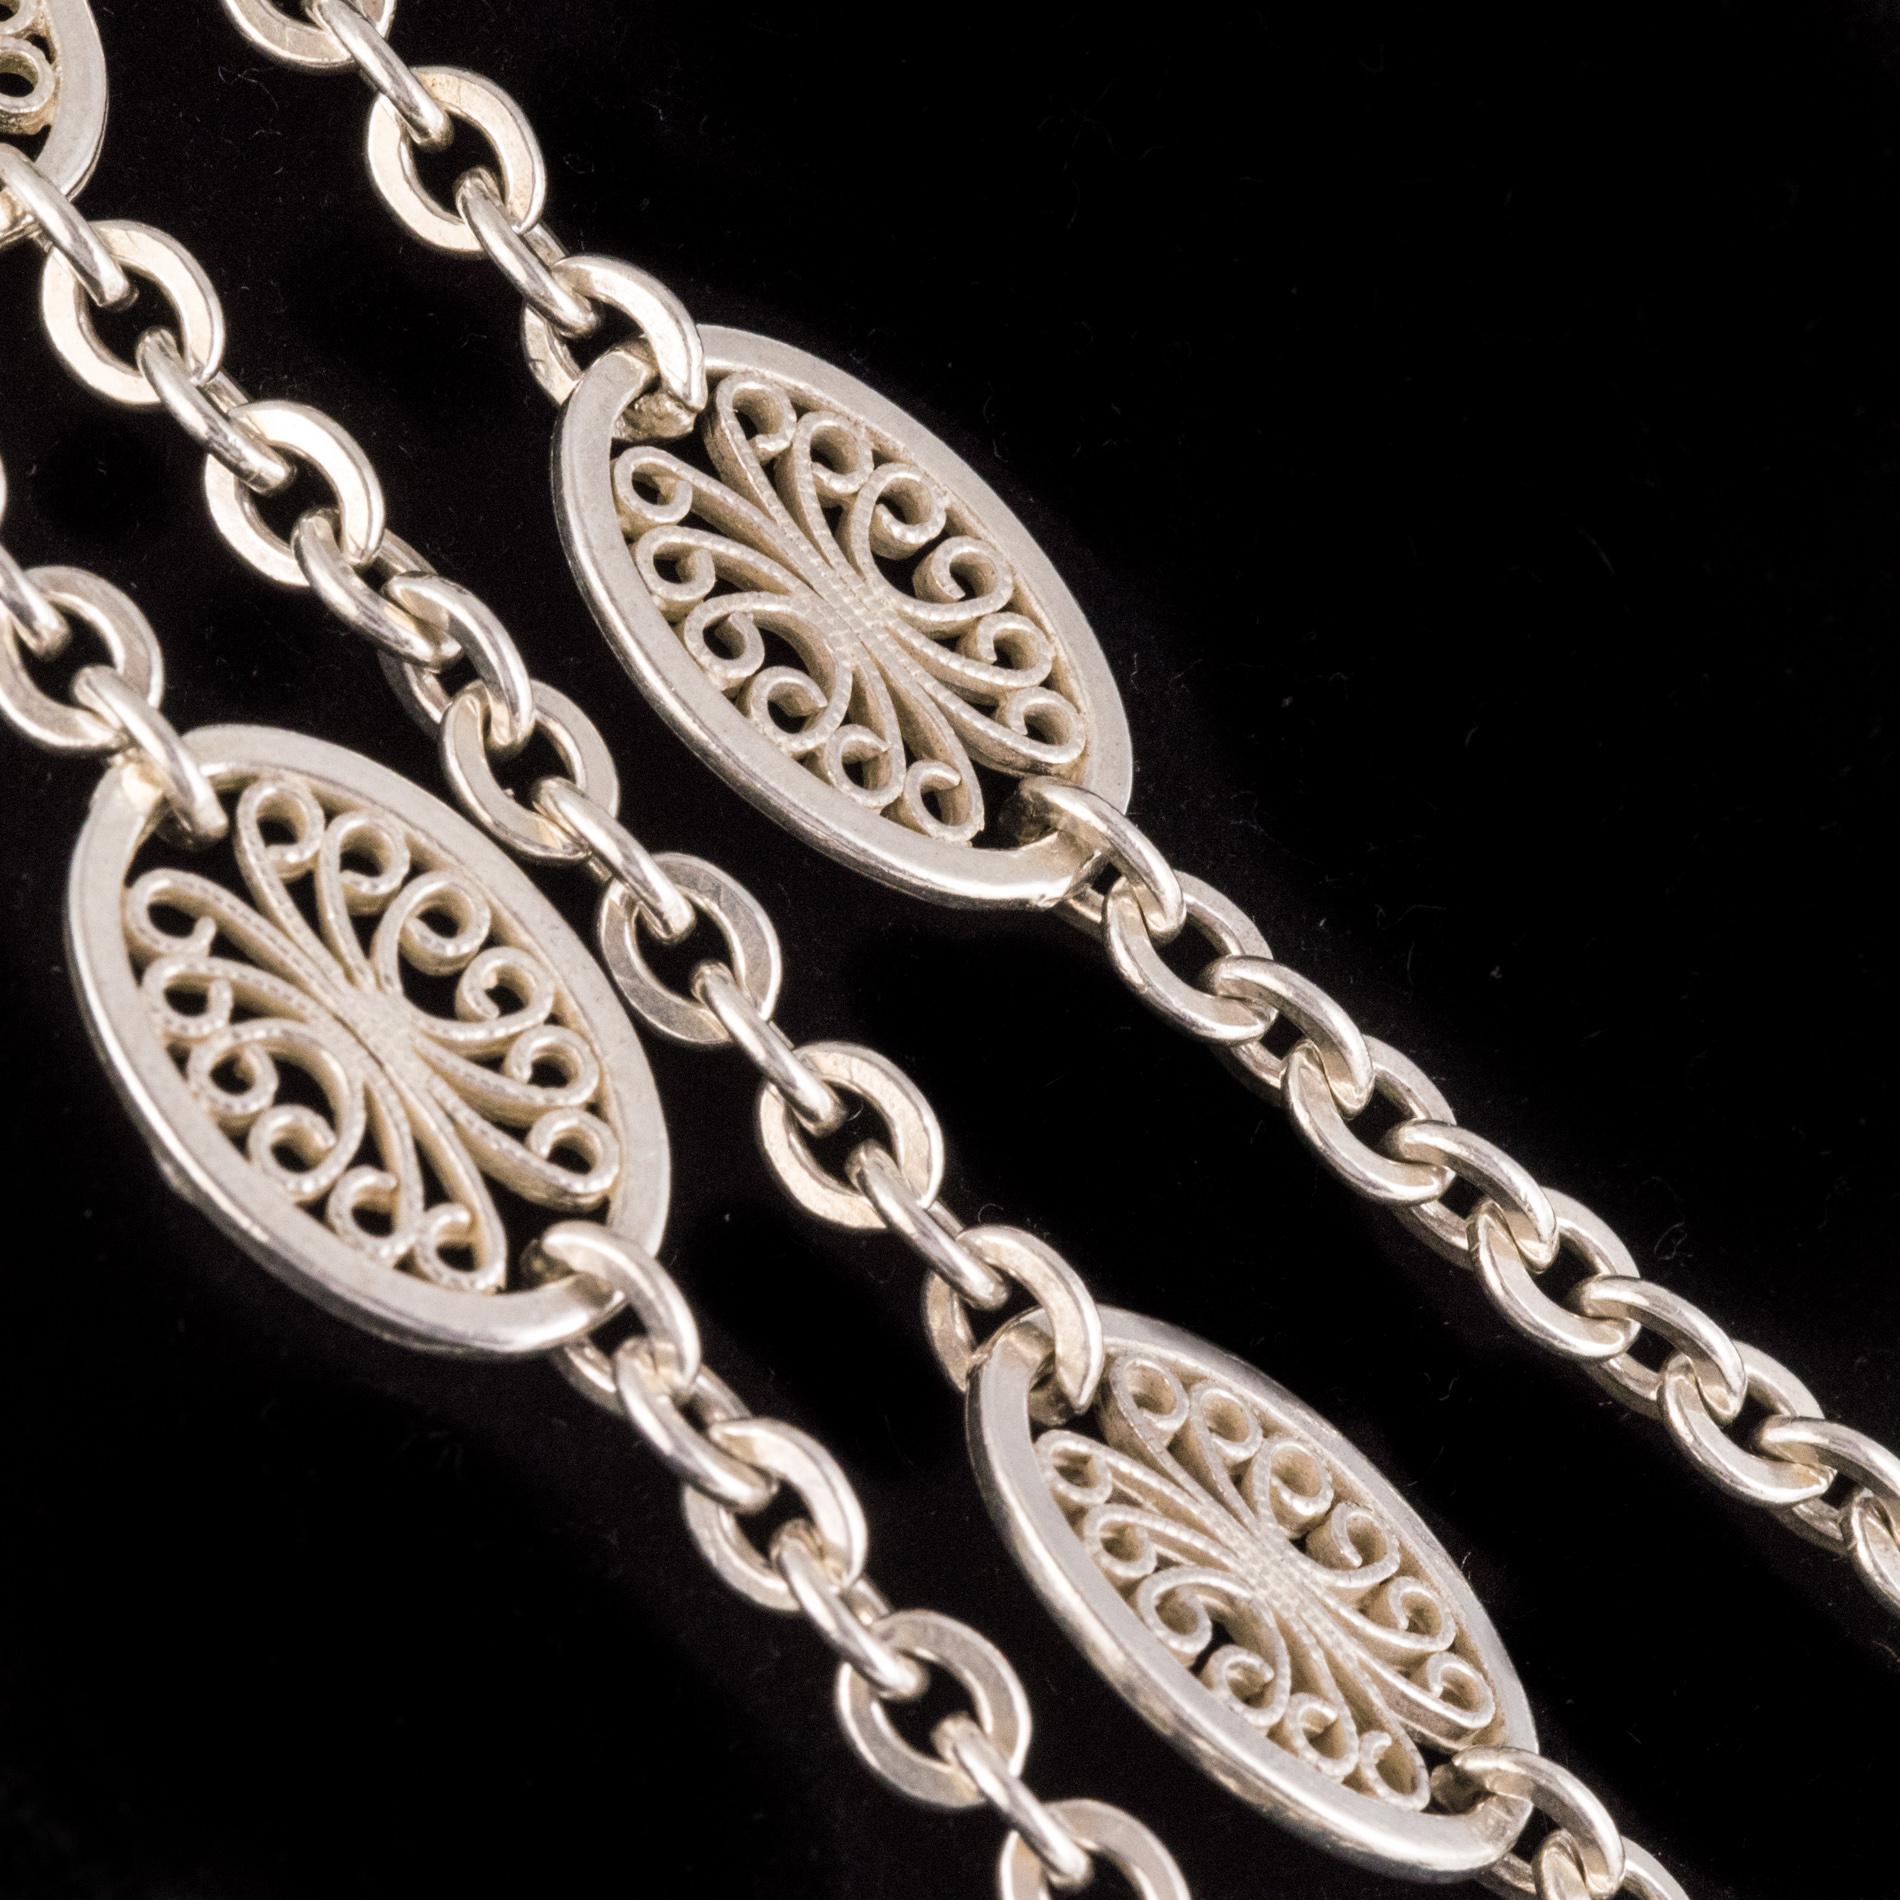 Long necklace in silver, crab hallmark.
This magnificent antique long necklace is made up of an oval cable mesh separated by an oval pattern with openwork filigree. The clasp is a spring ring.
Total length : approximately 140 cm, width at the level